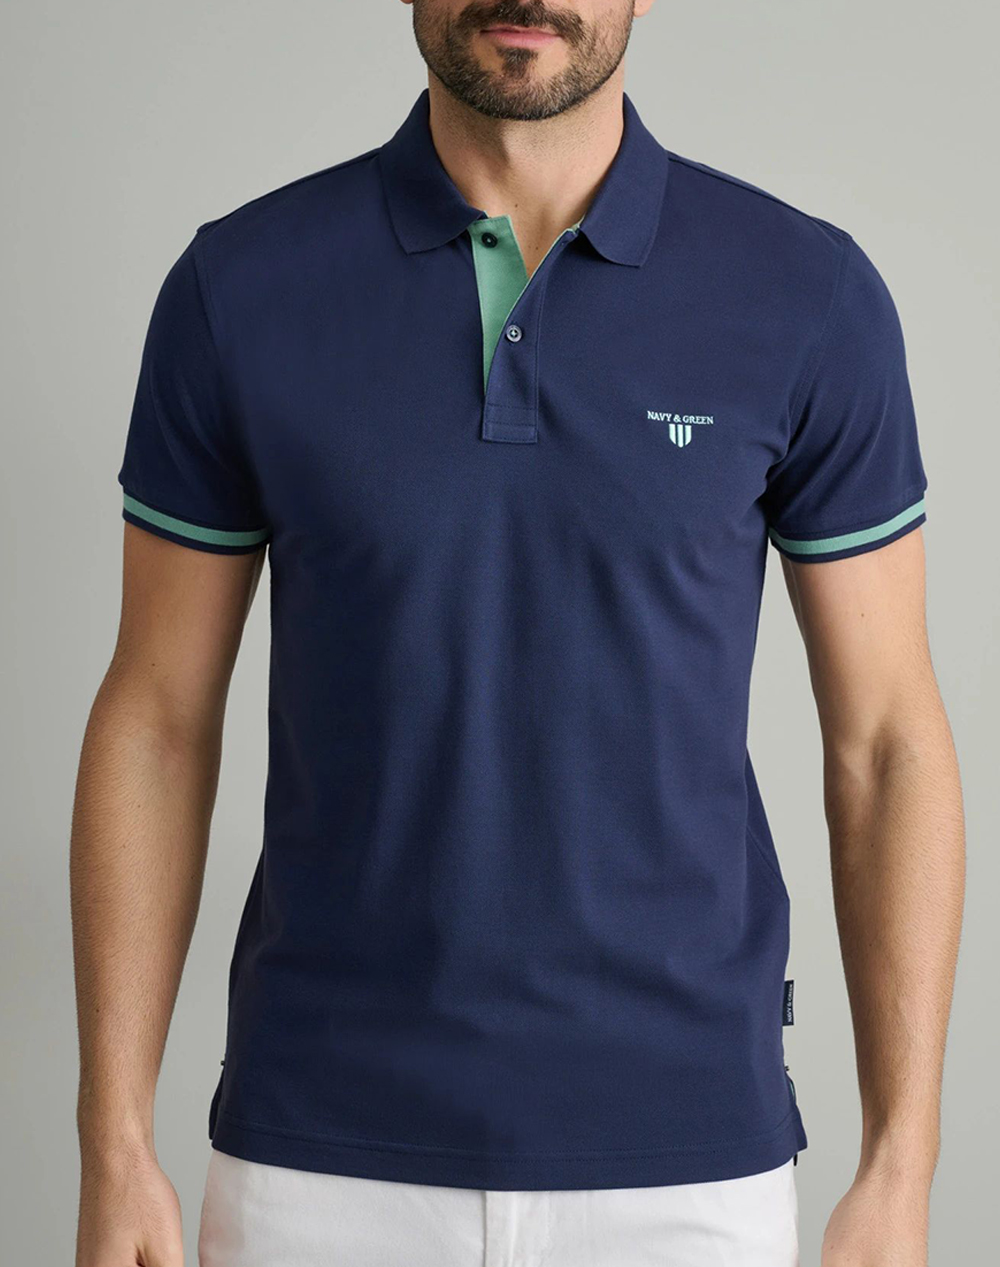 NAVY&GREEN POLO SHIRT-YOUNG LINE